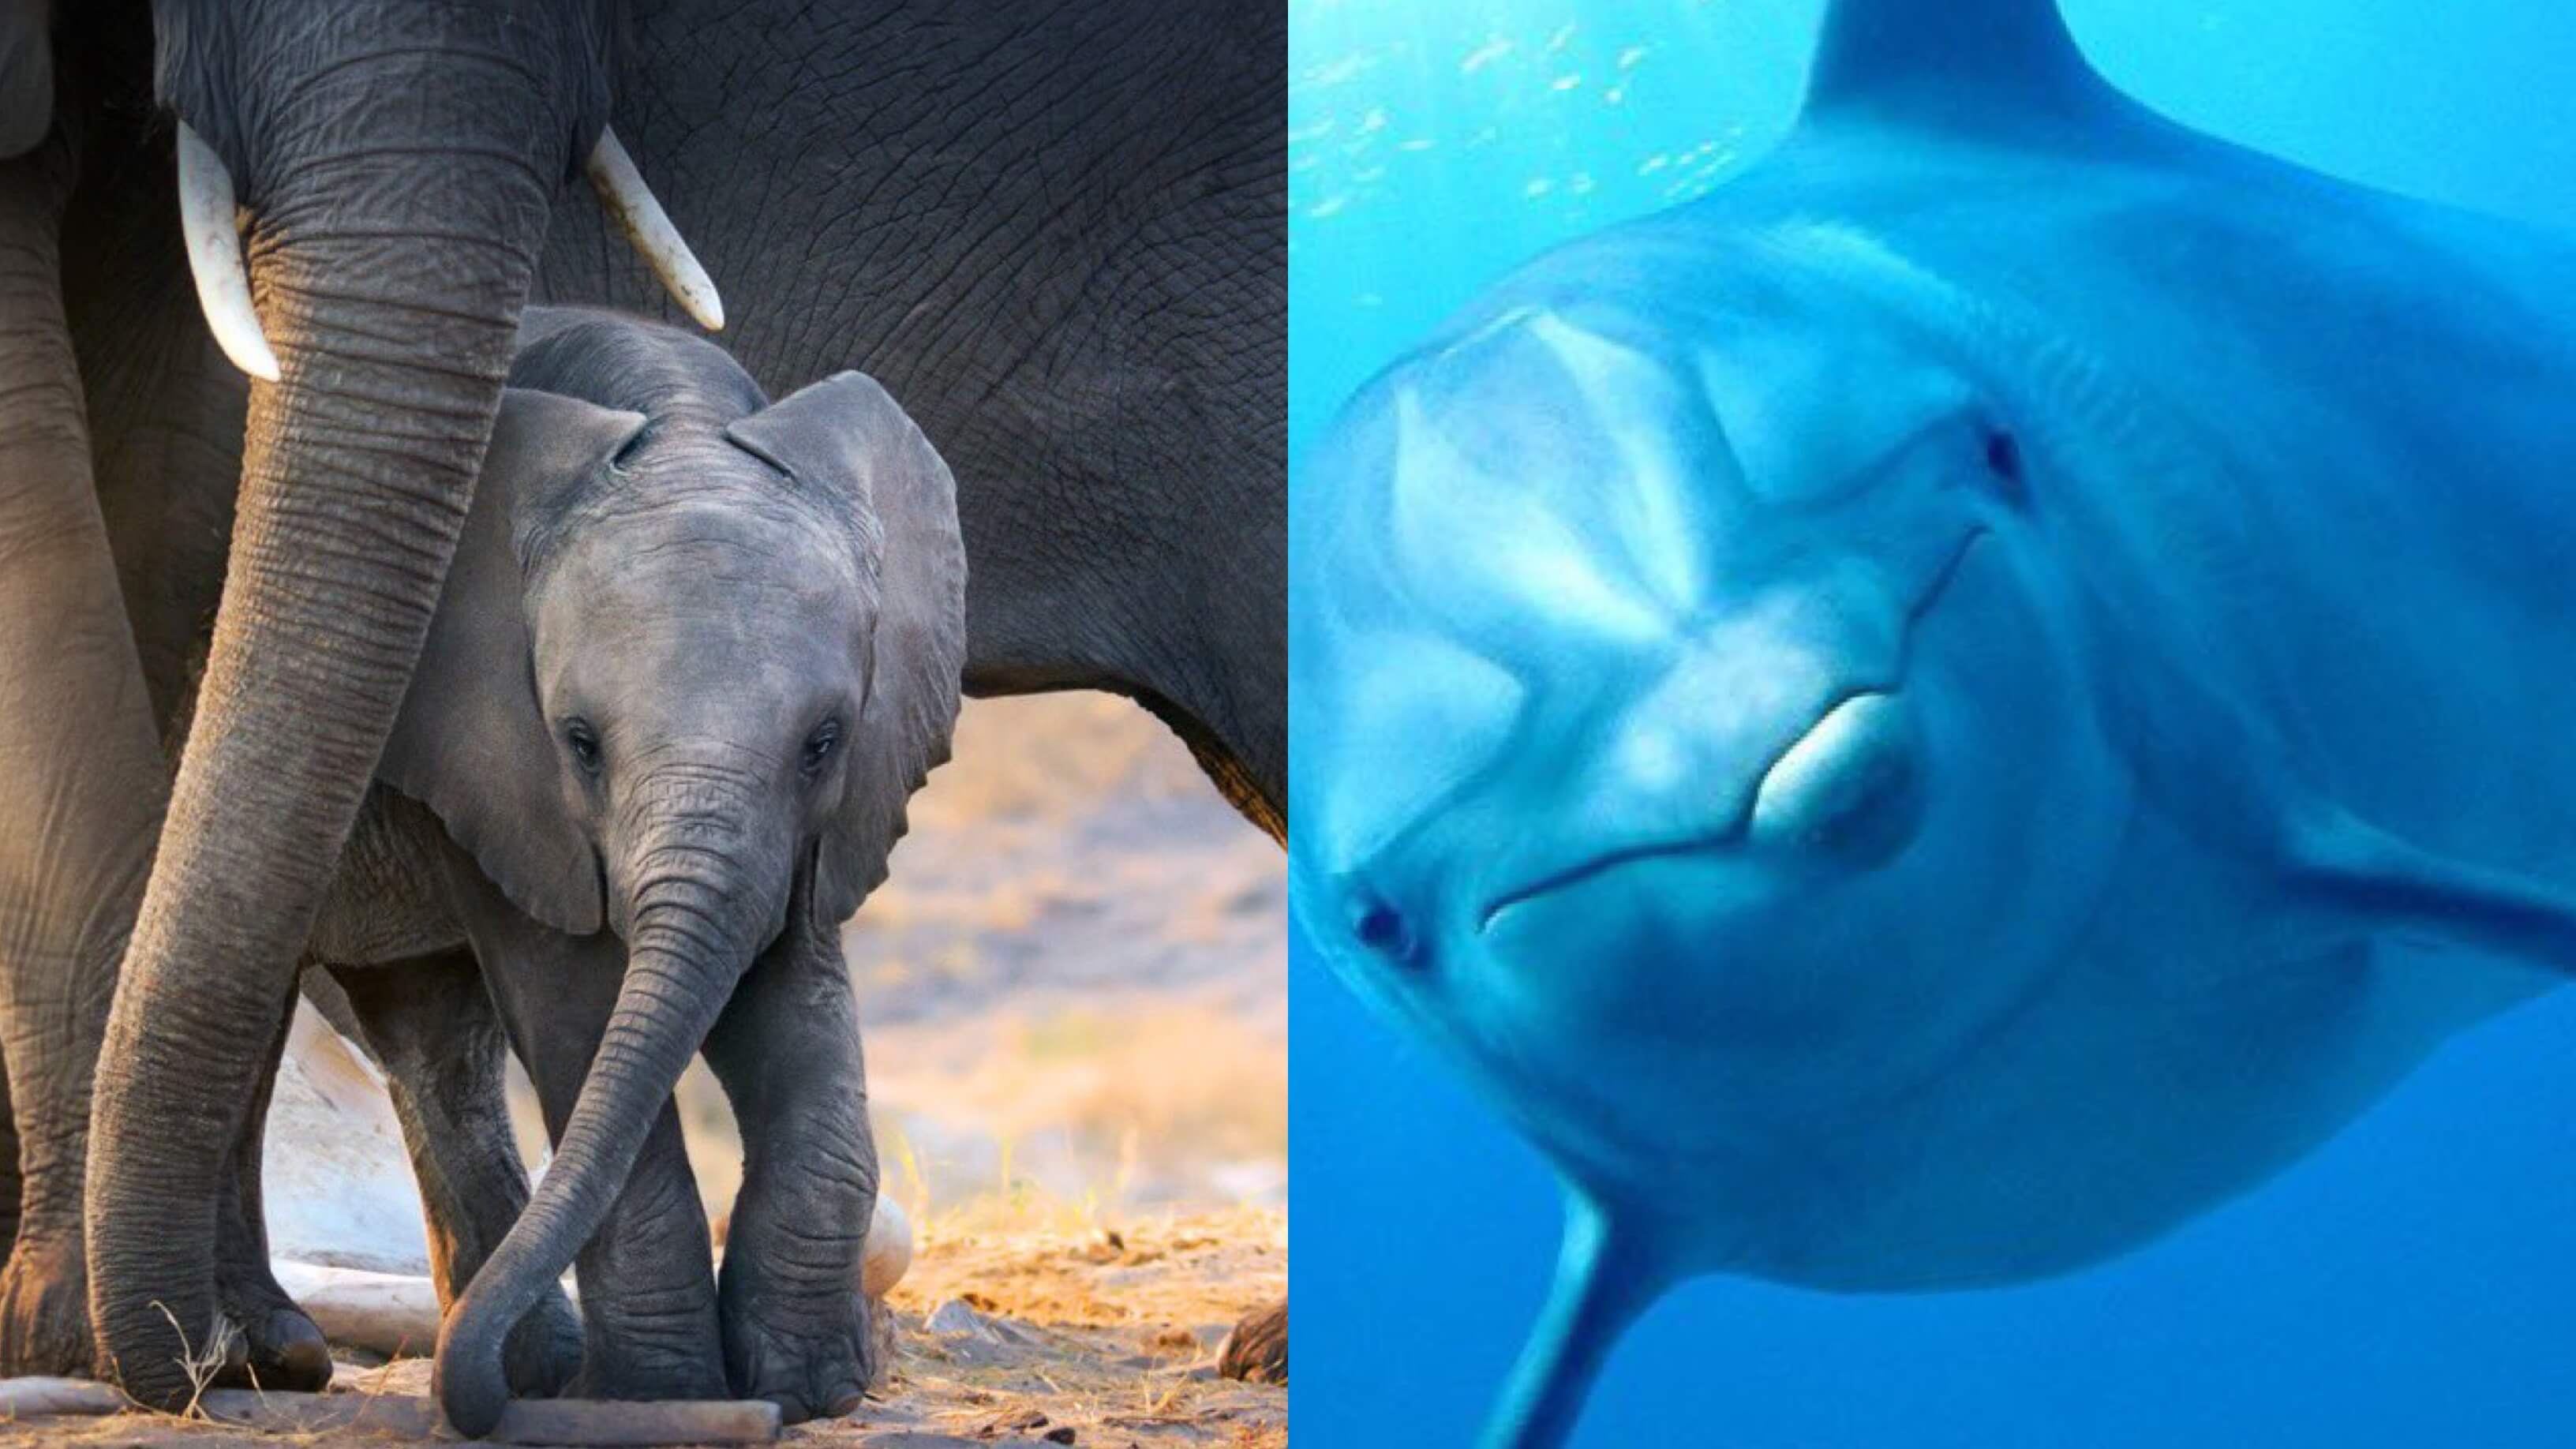 Disneynature Releasing ‘Elephant’ and ‘Dolphin Reef’ on Disney+ on April 3